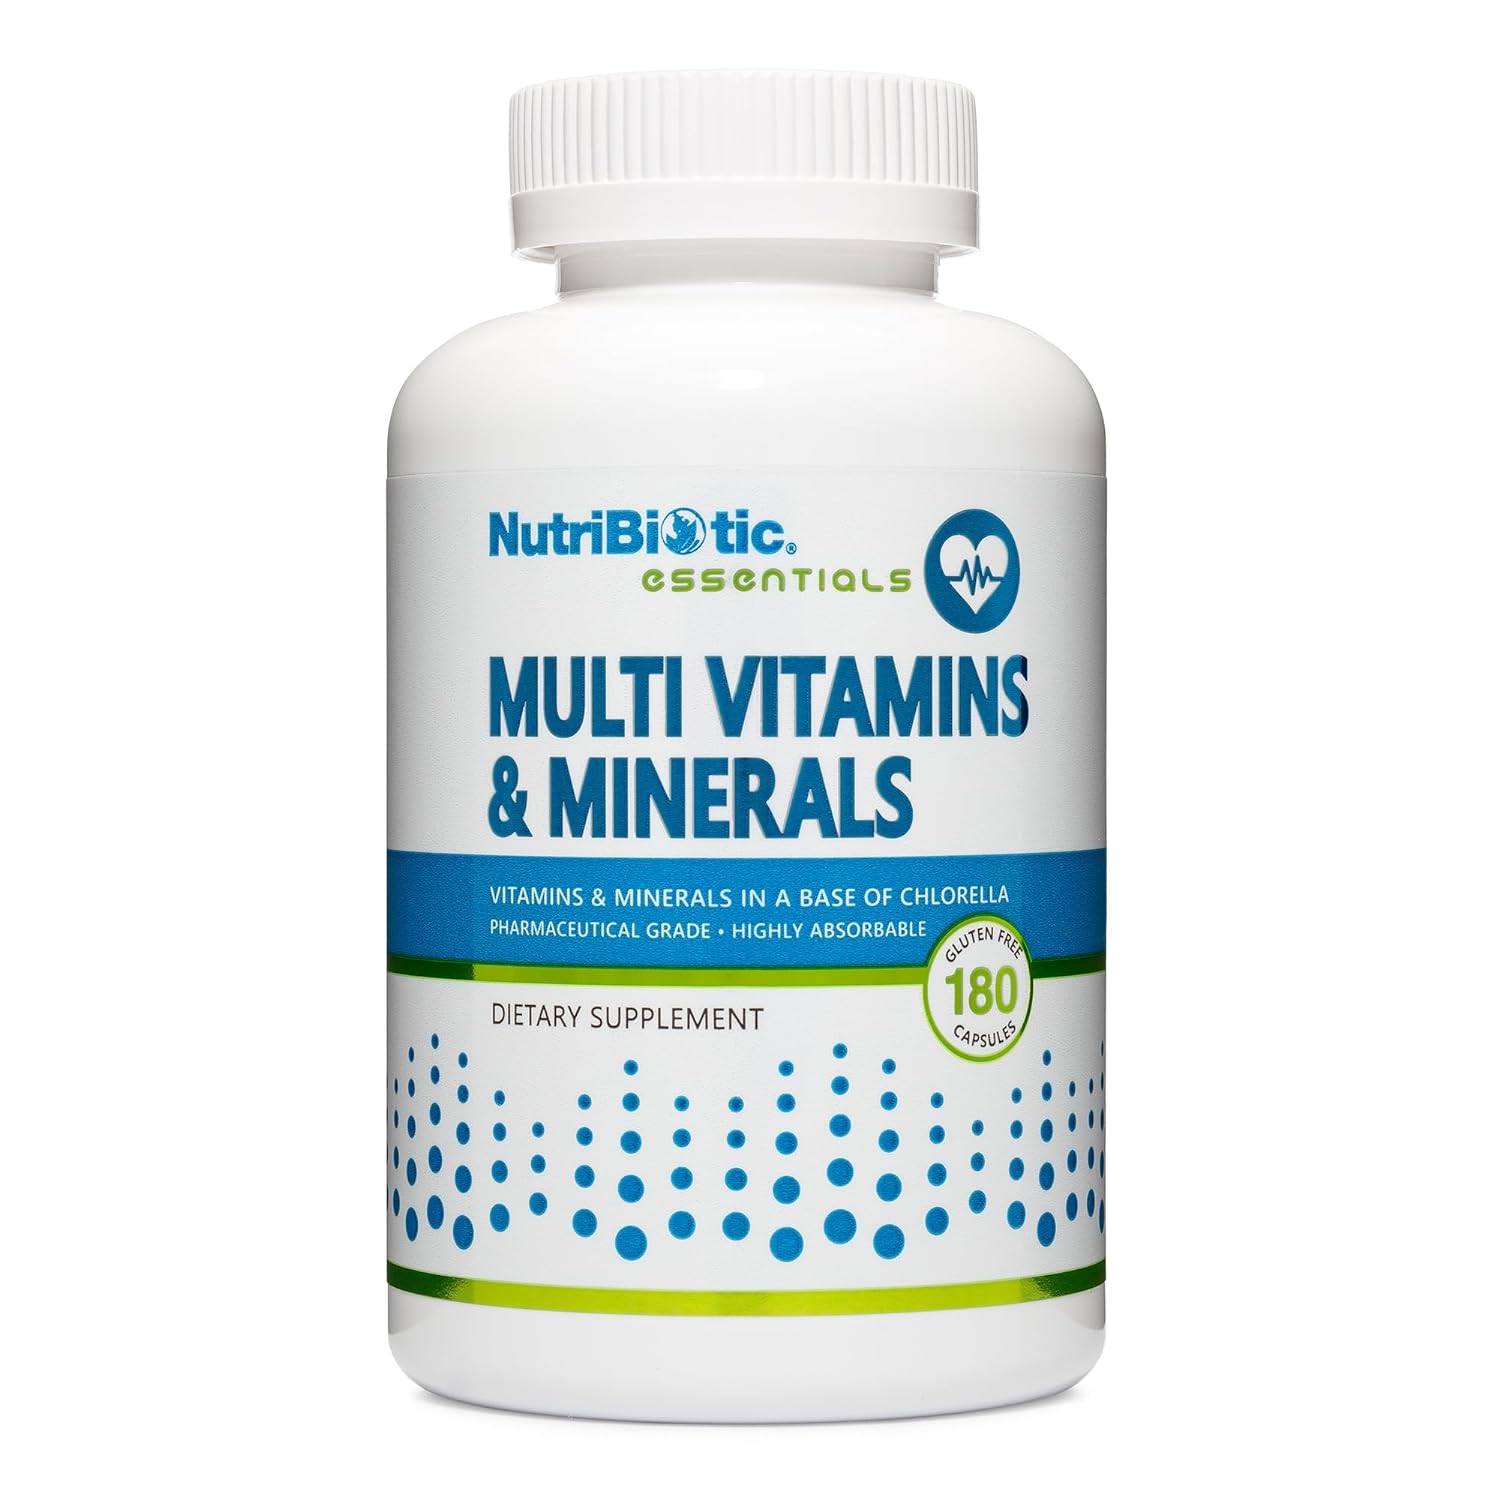 NutriBiotic ? Multi Vitamins & Minerals, 180 Ct Capsules (Formerly Hypoallergenic Multiple) | 72 Pure Trace Elements in a Base of Chlorella | Pharmaceutical-Grade & Highly Absorbable | Gluten Free